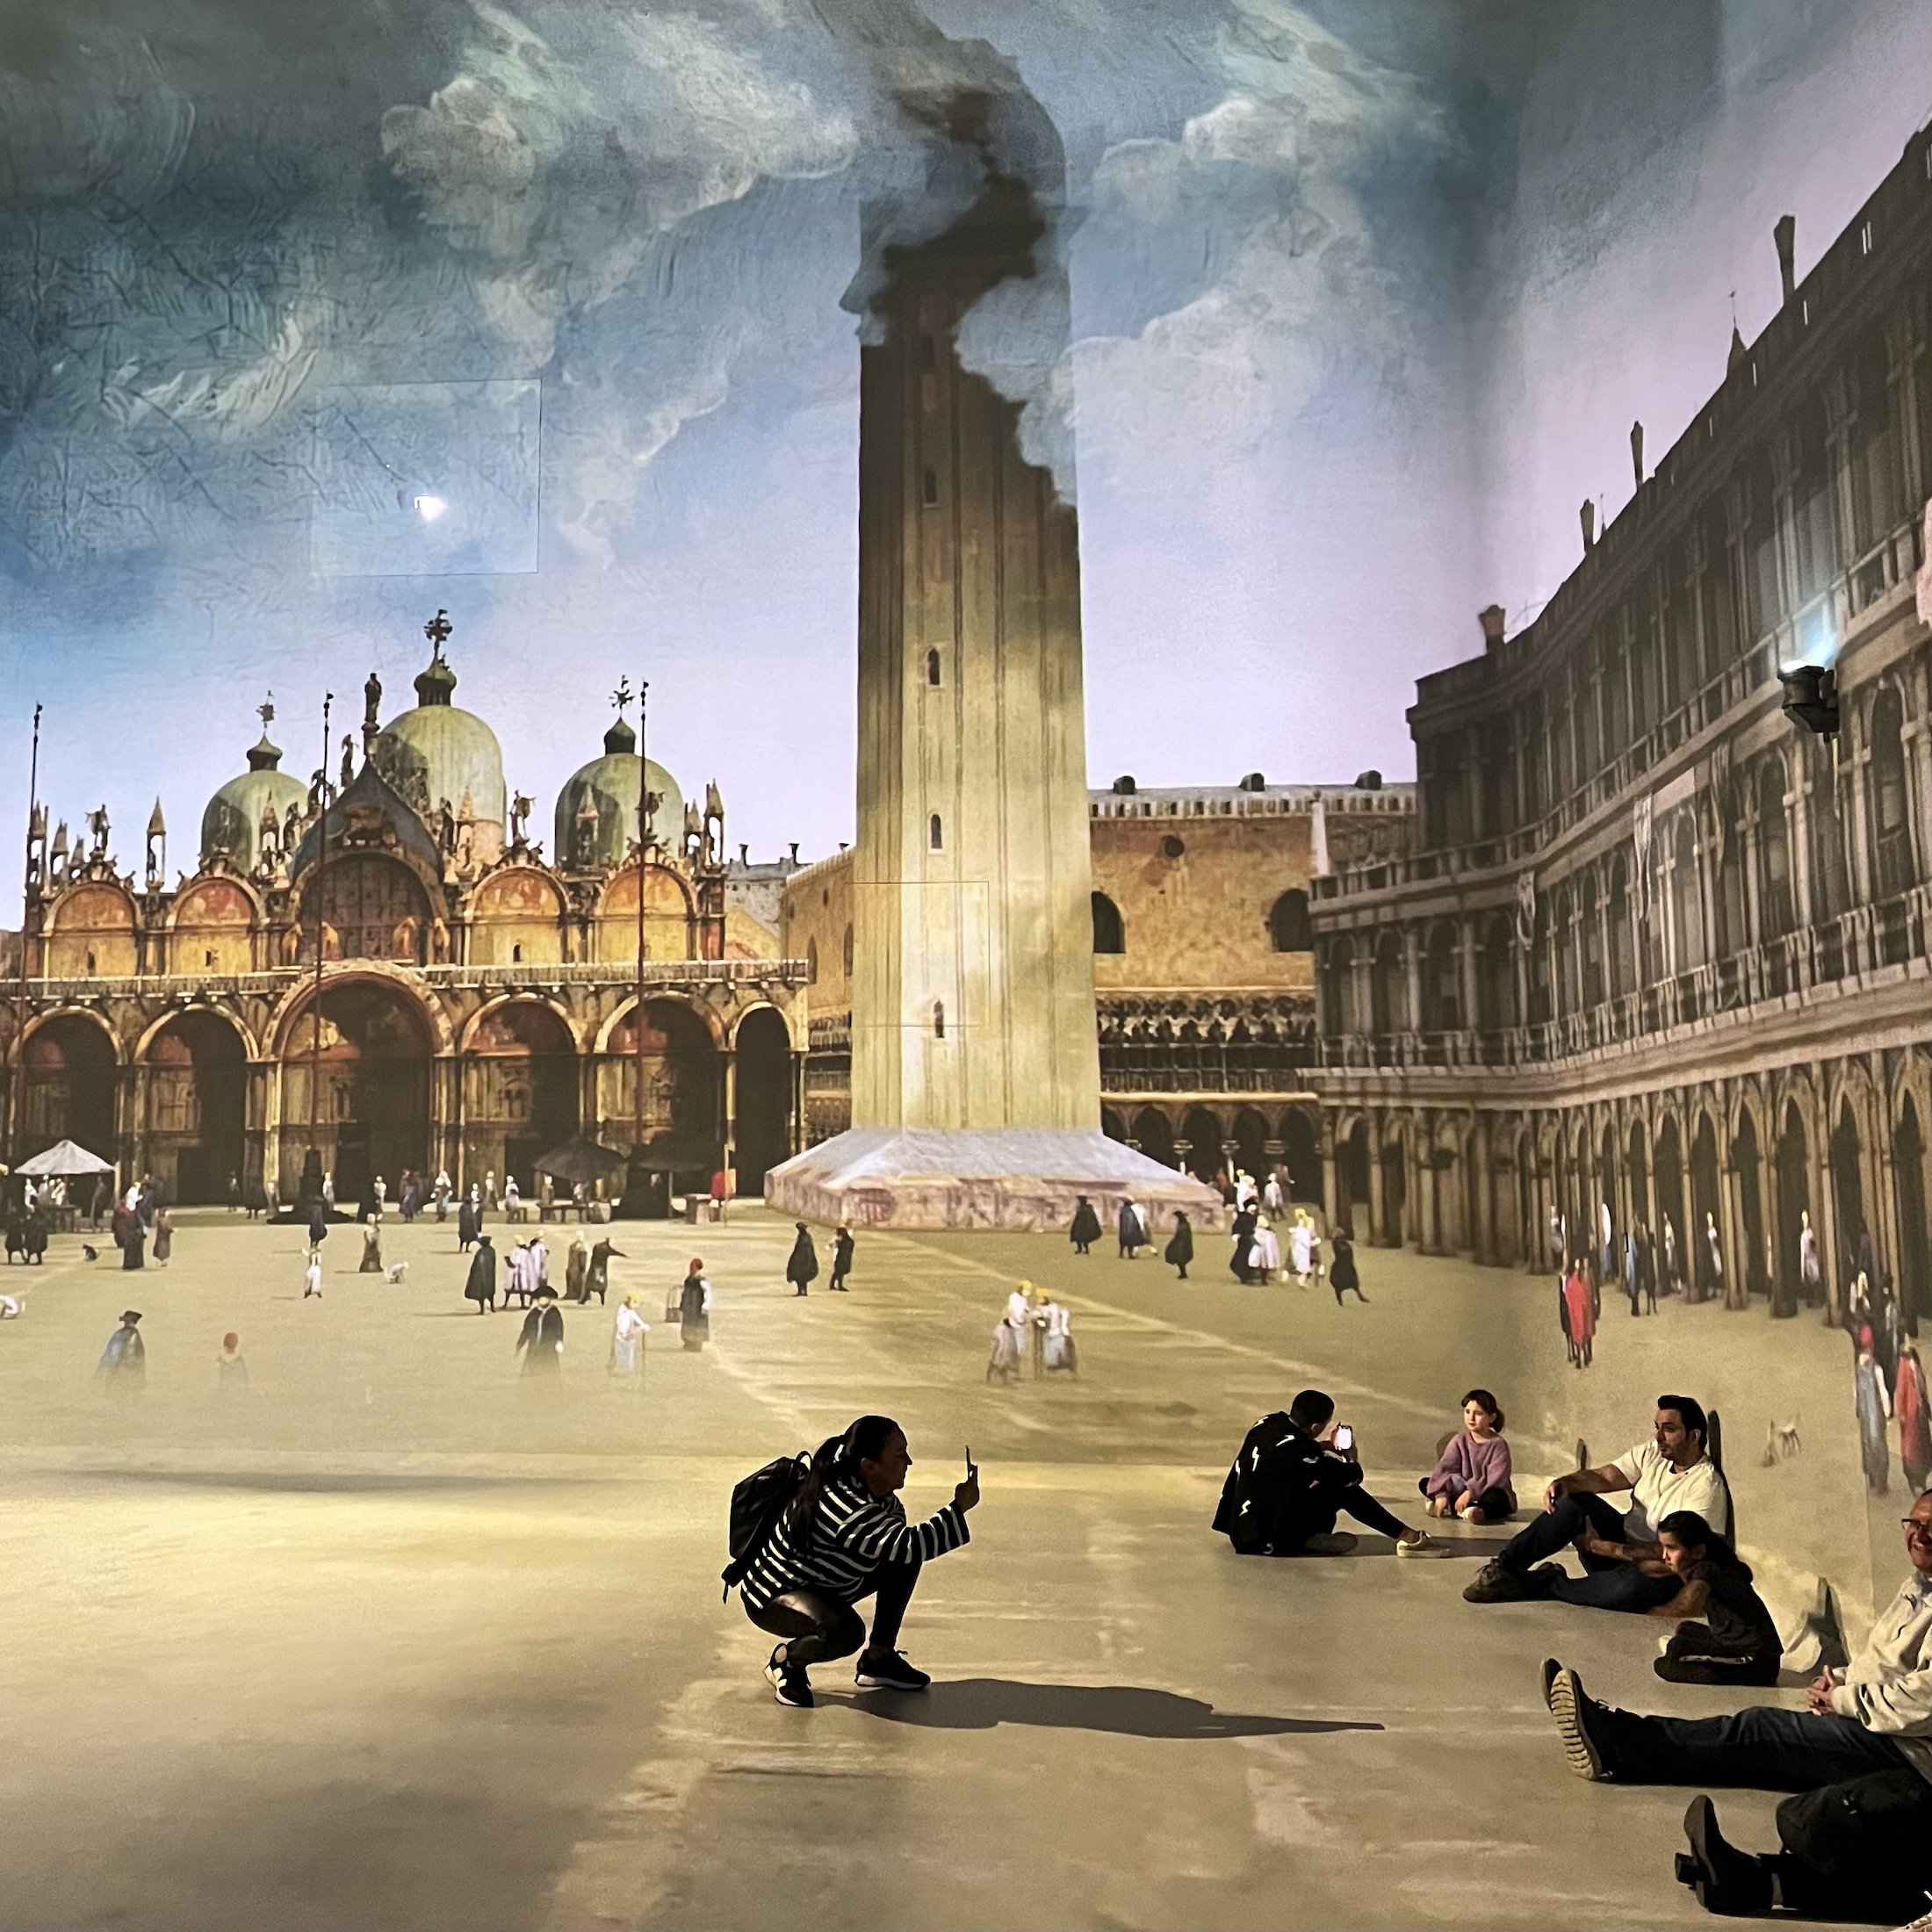 Frameless Art Exhibition - Canaletto Projection